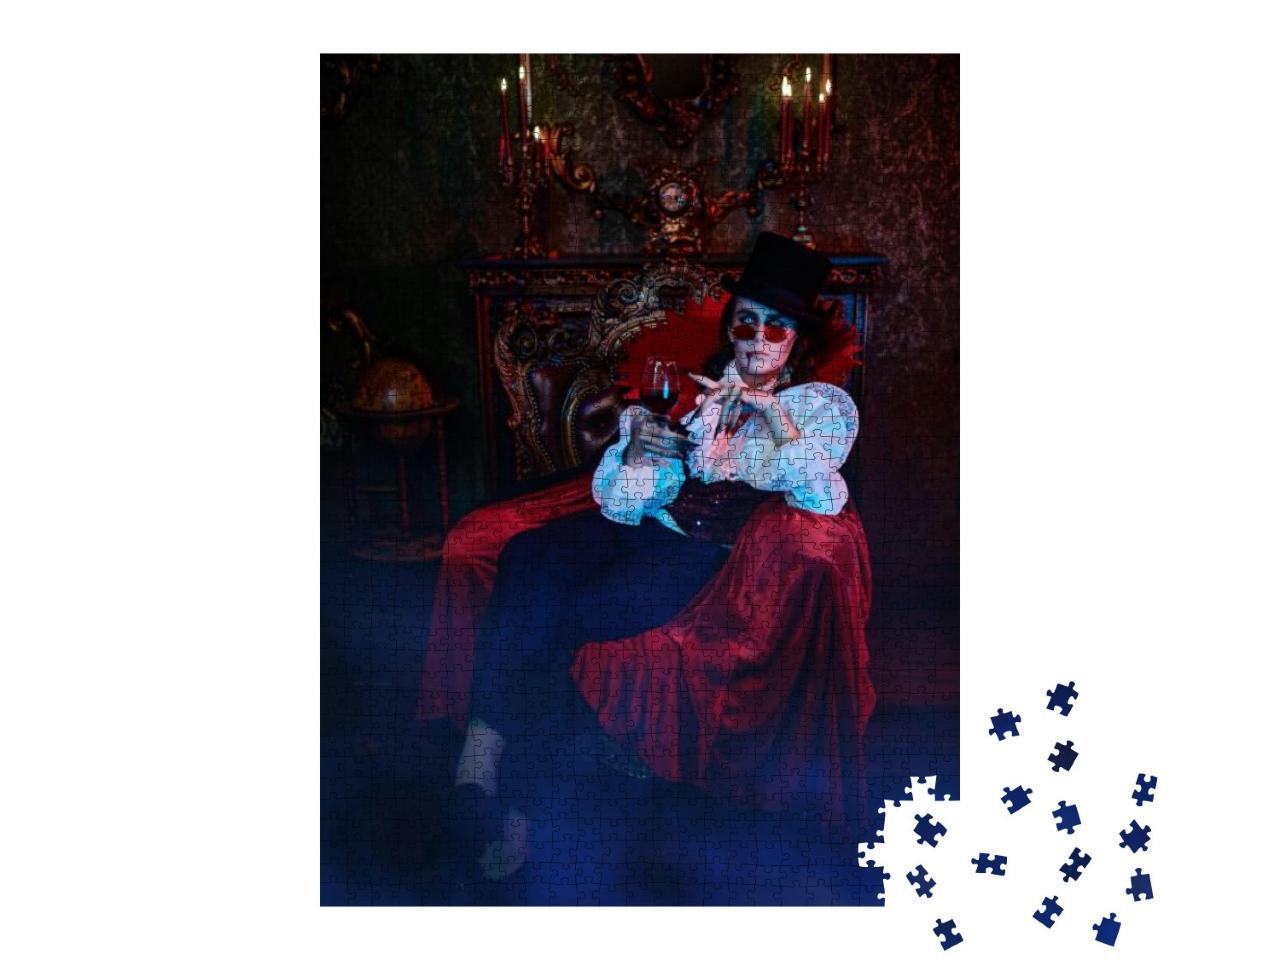 Handsome Vampire Aristocrat of the 19th Century in an Ele... Jigsaw Puzzle with 1000 pieces